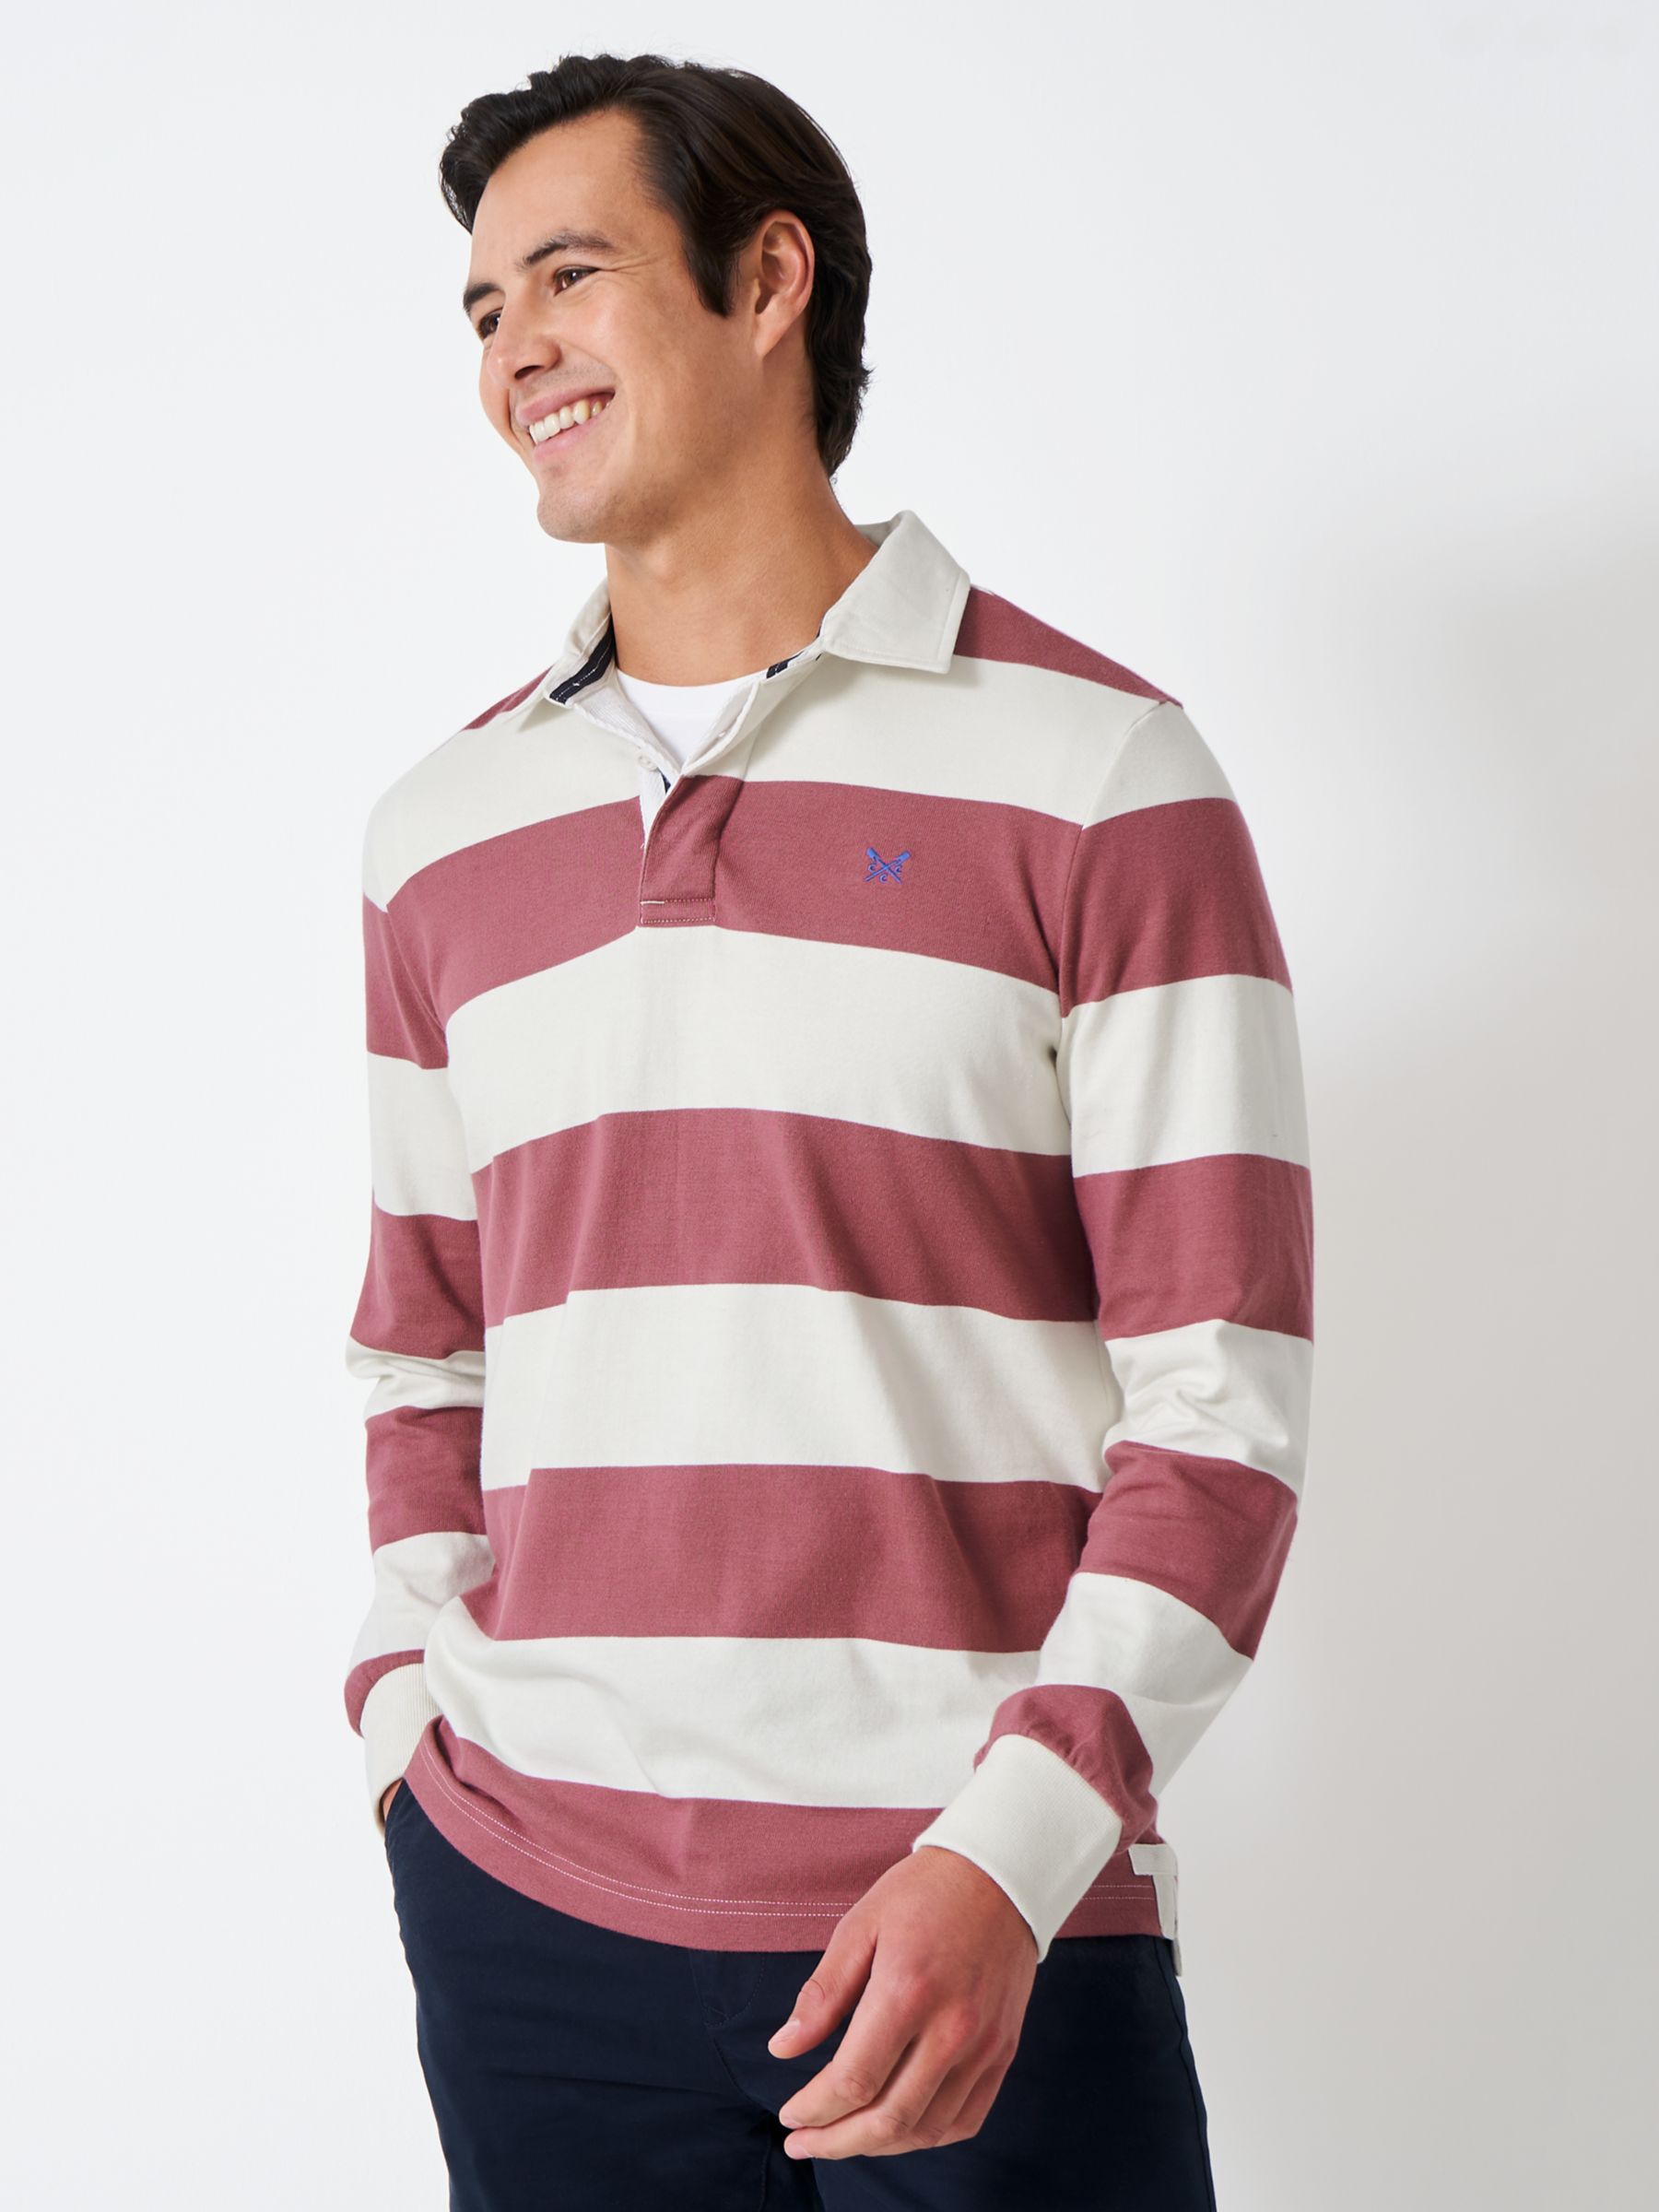 Crew Clothing Heritage Stripe Rugby Top at John Lewis & Partners